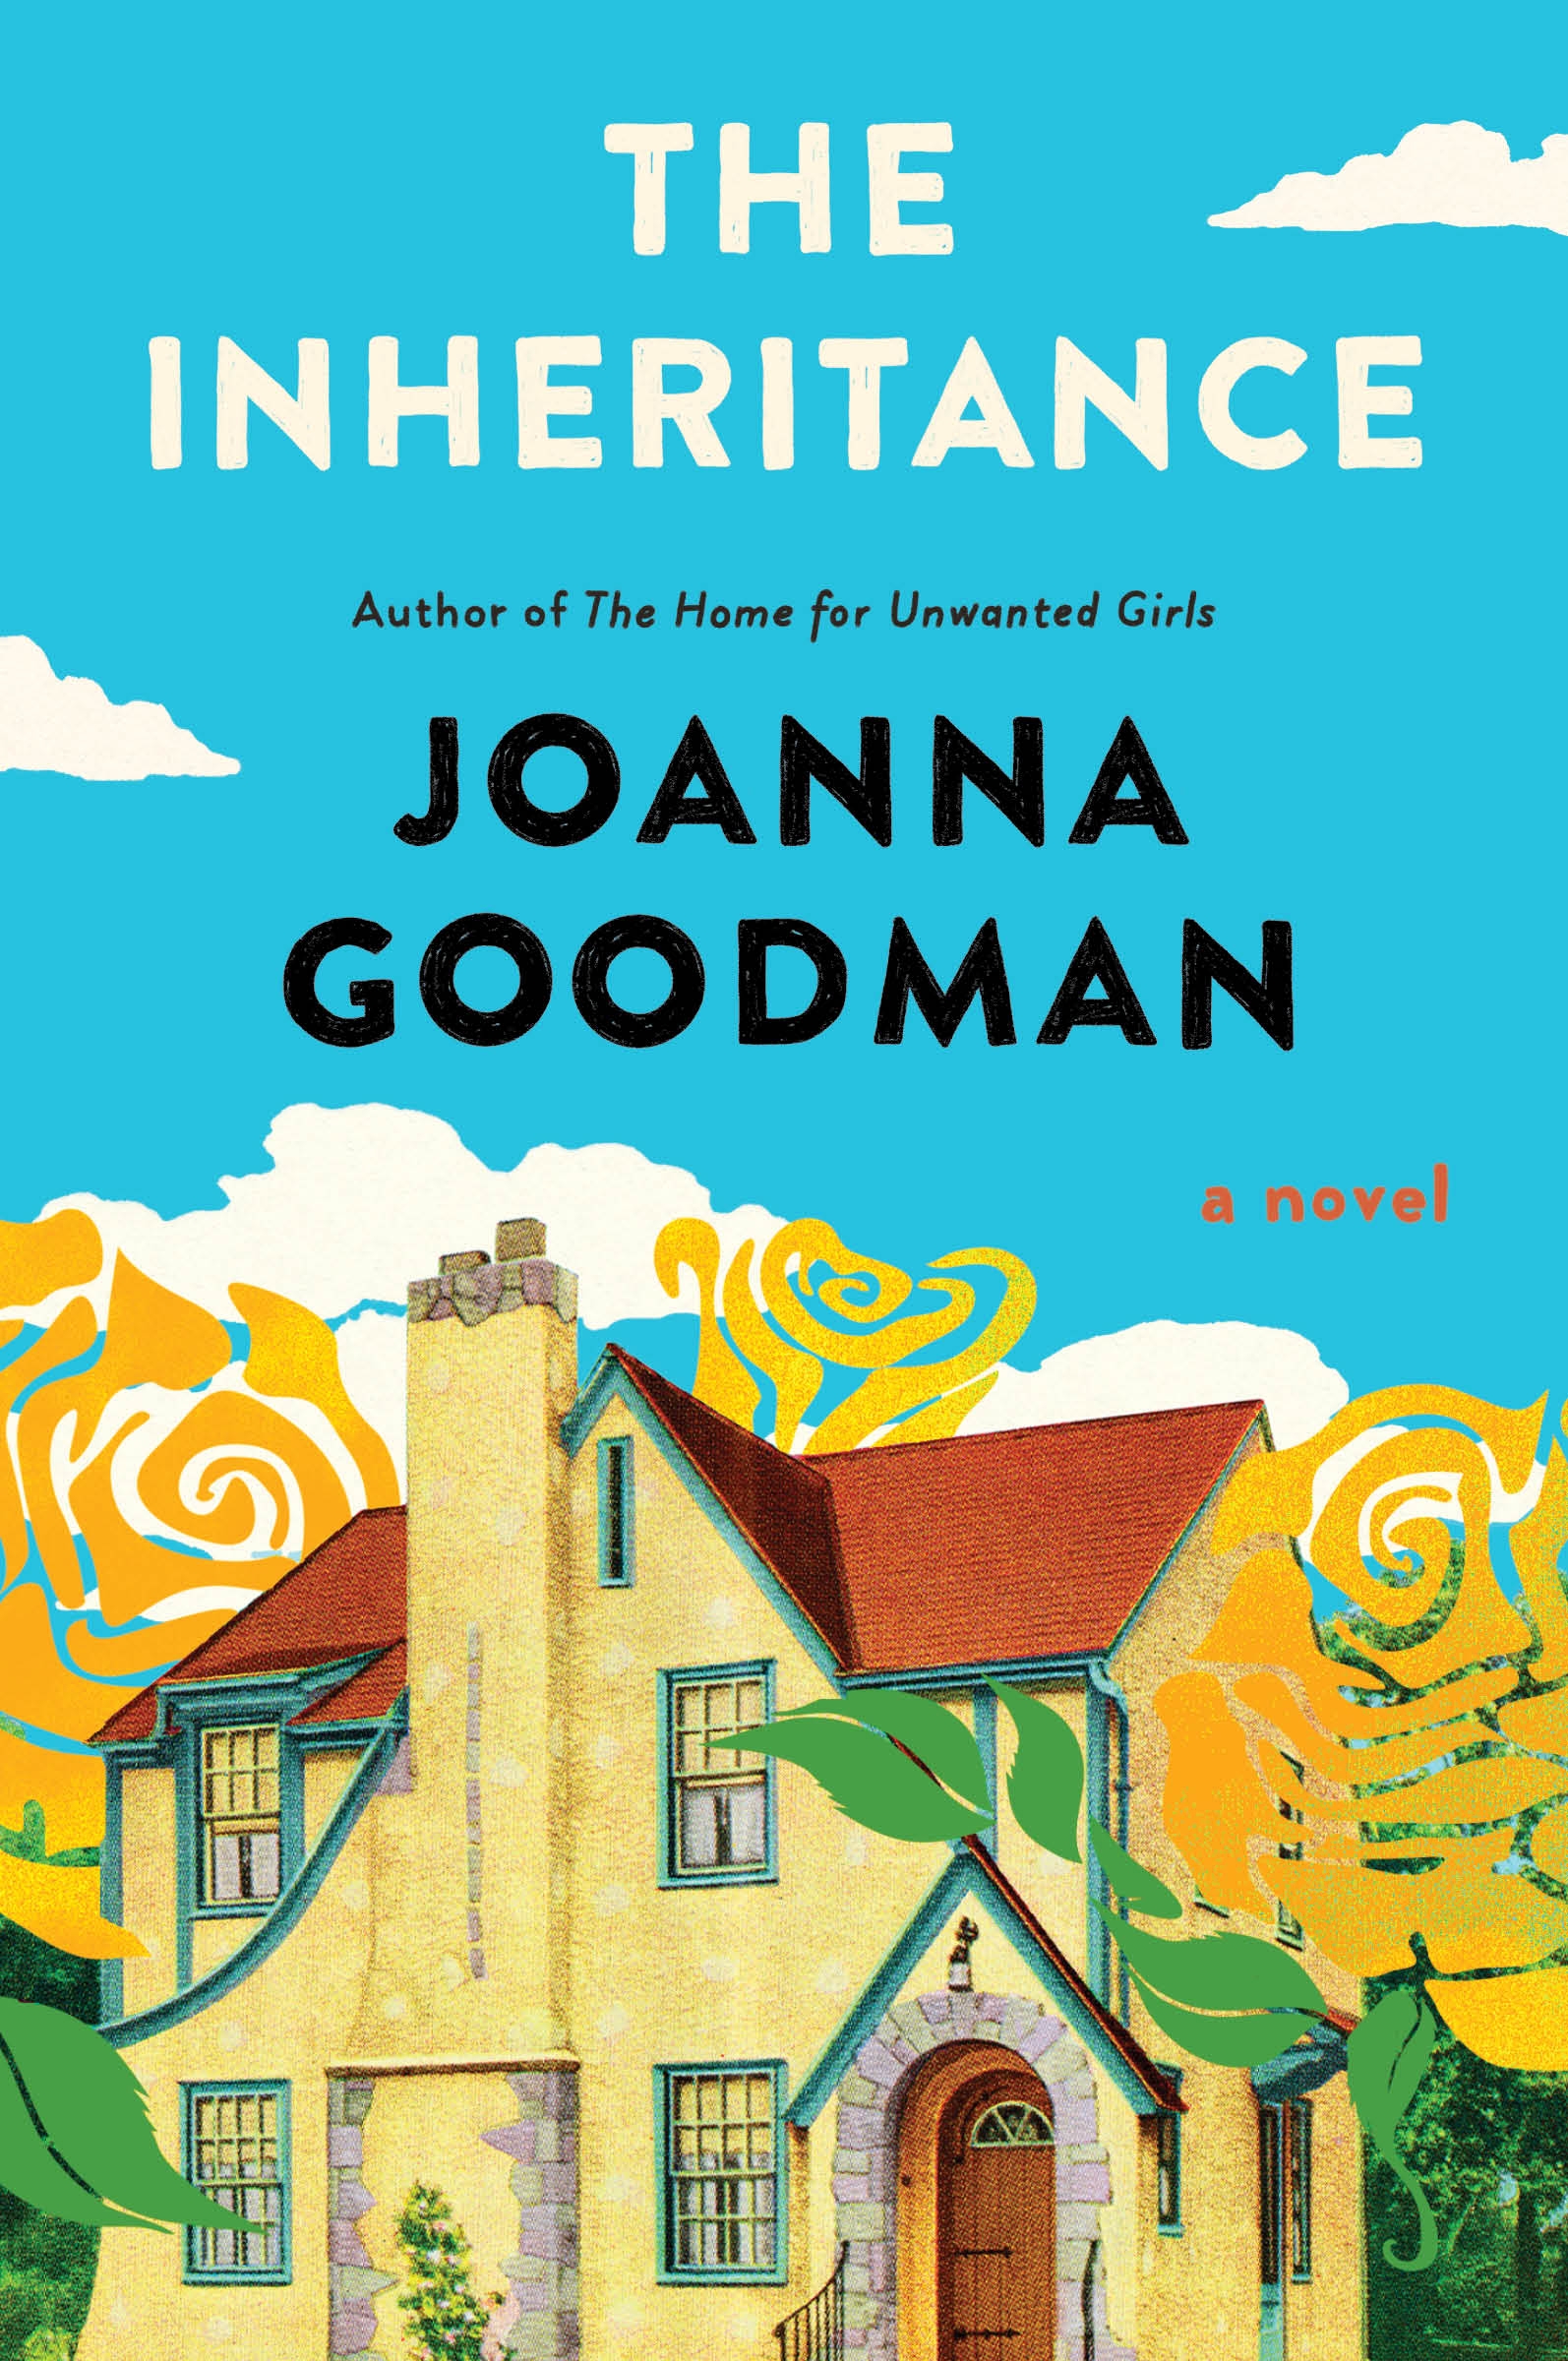 One of our recommended books is The Inheritance by Joanna Goodman